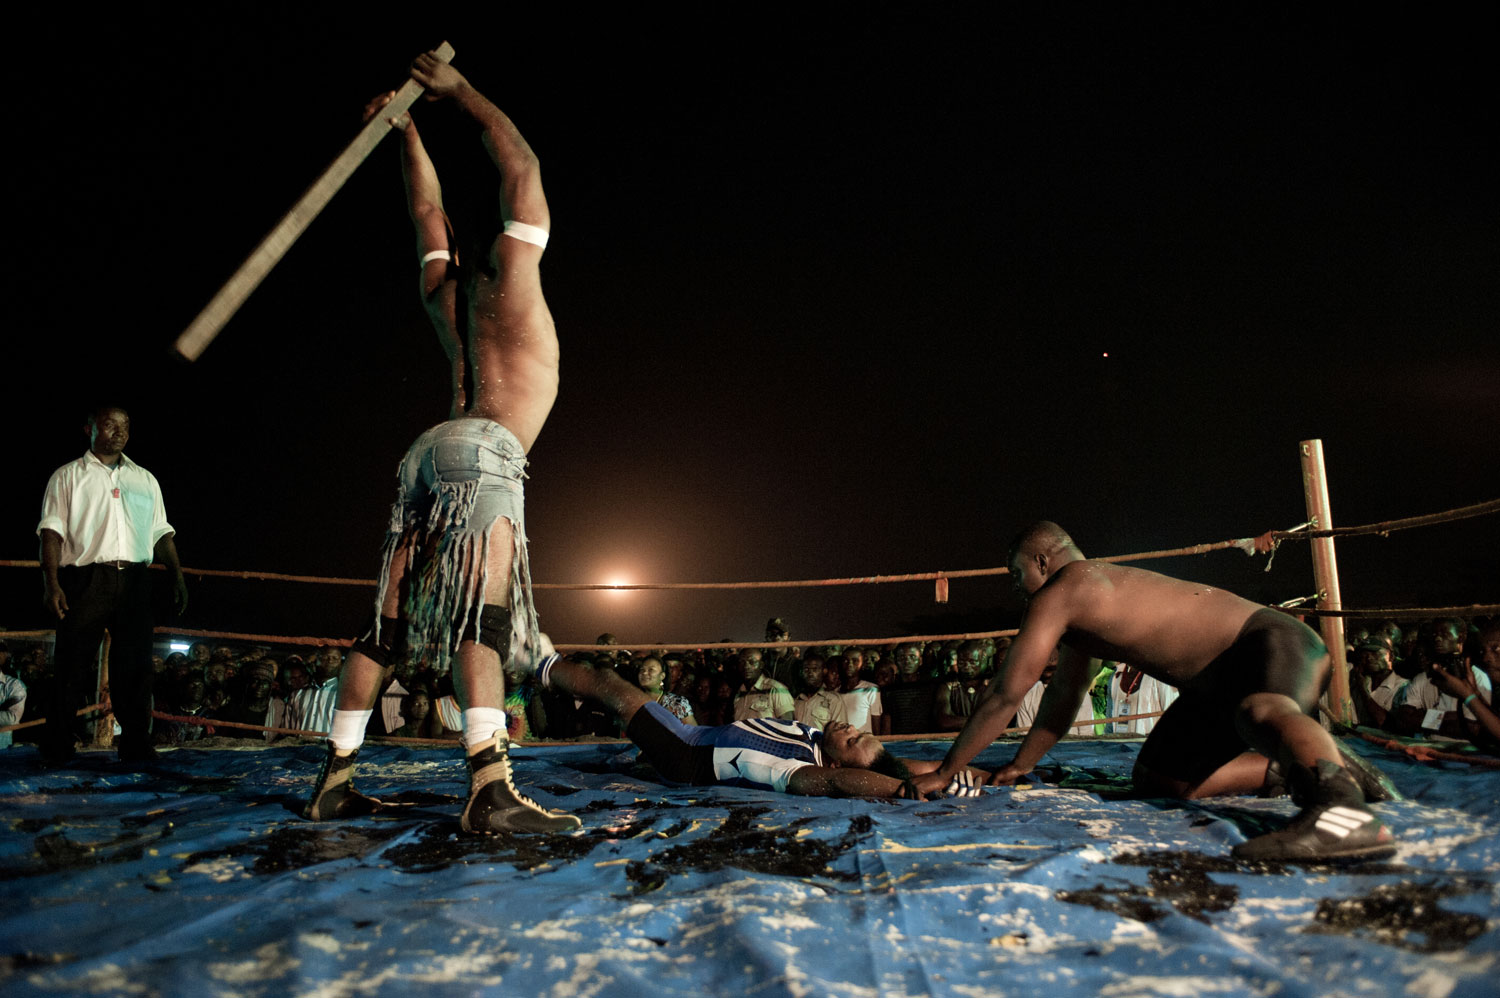 In a fetish match, Loboko versus Django, they use planks and chains as weapons. The outcome of the fight is always more or less fixed, but there's always some improvisation during the match.